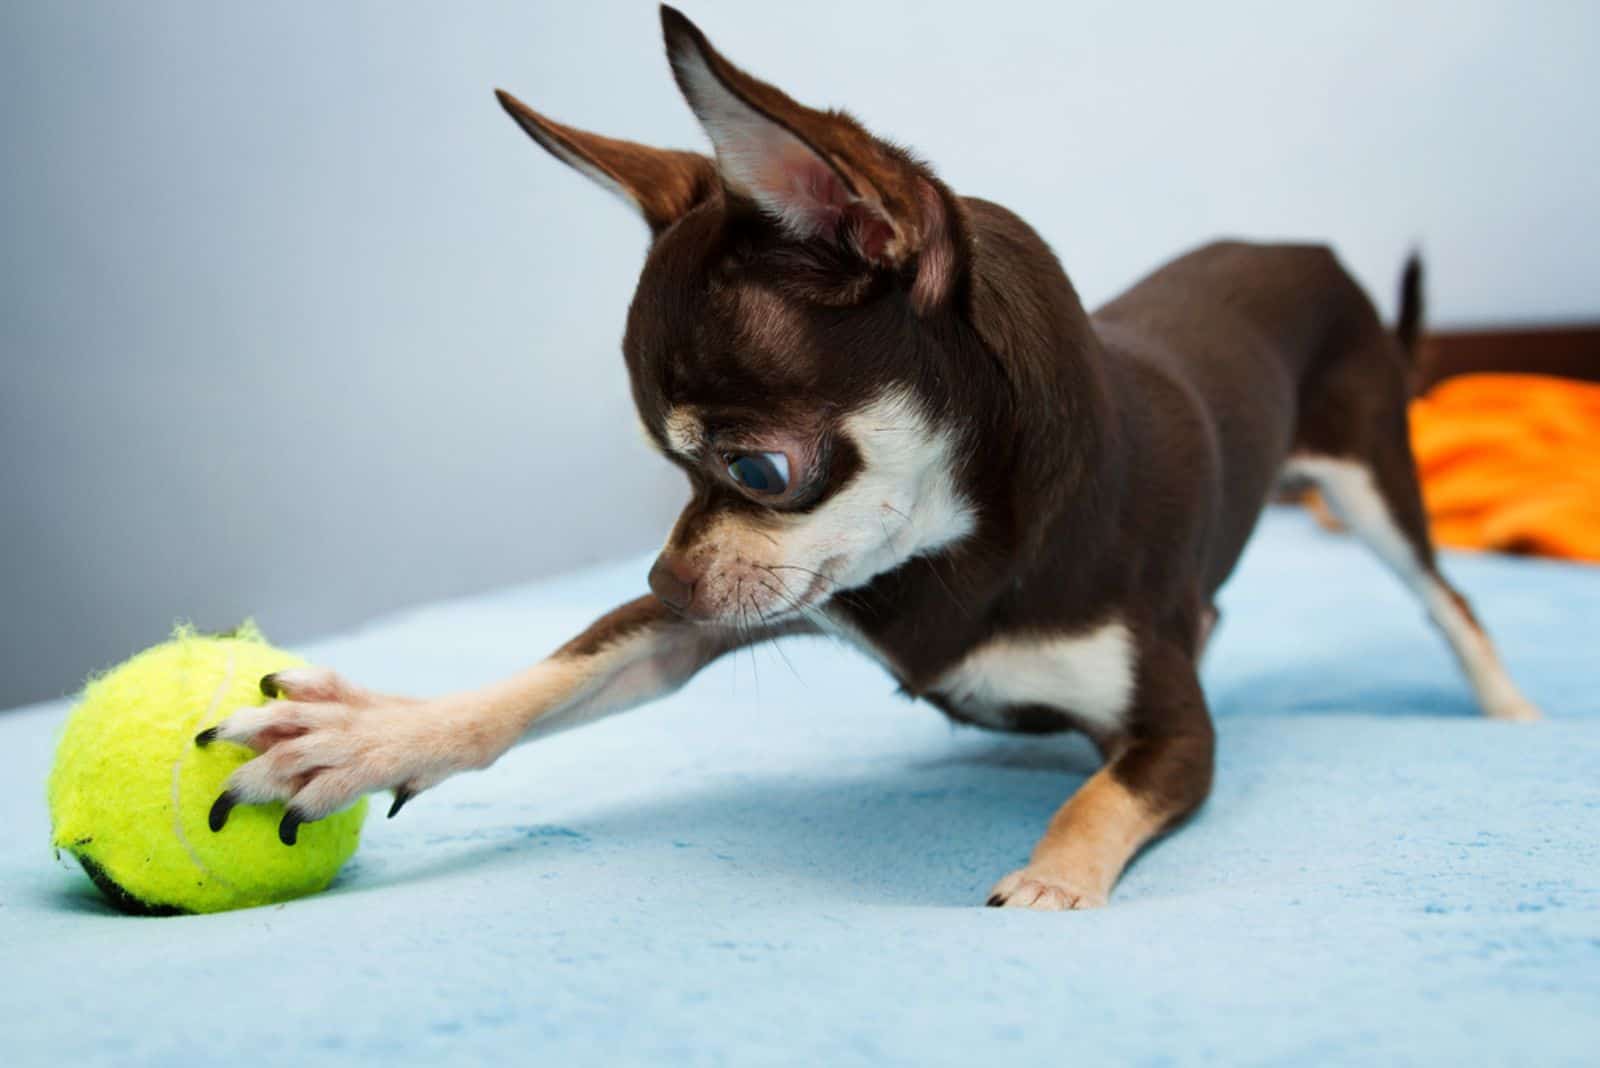 Chihuahua playing with small ball